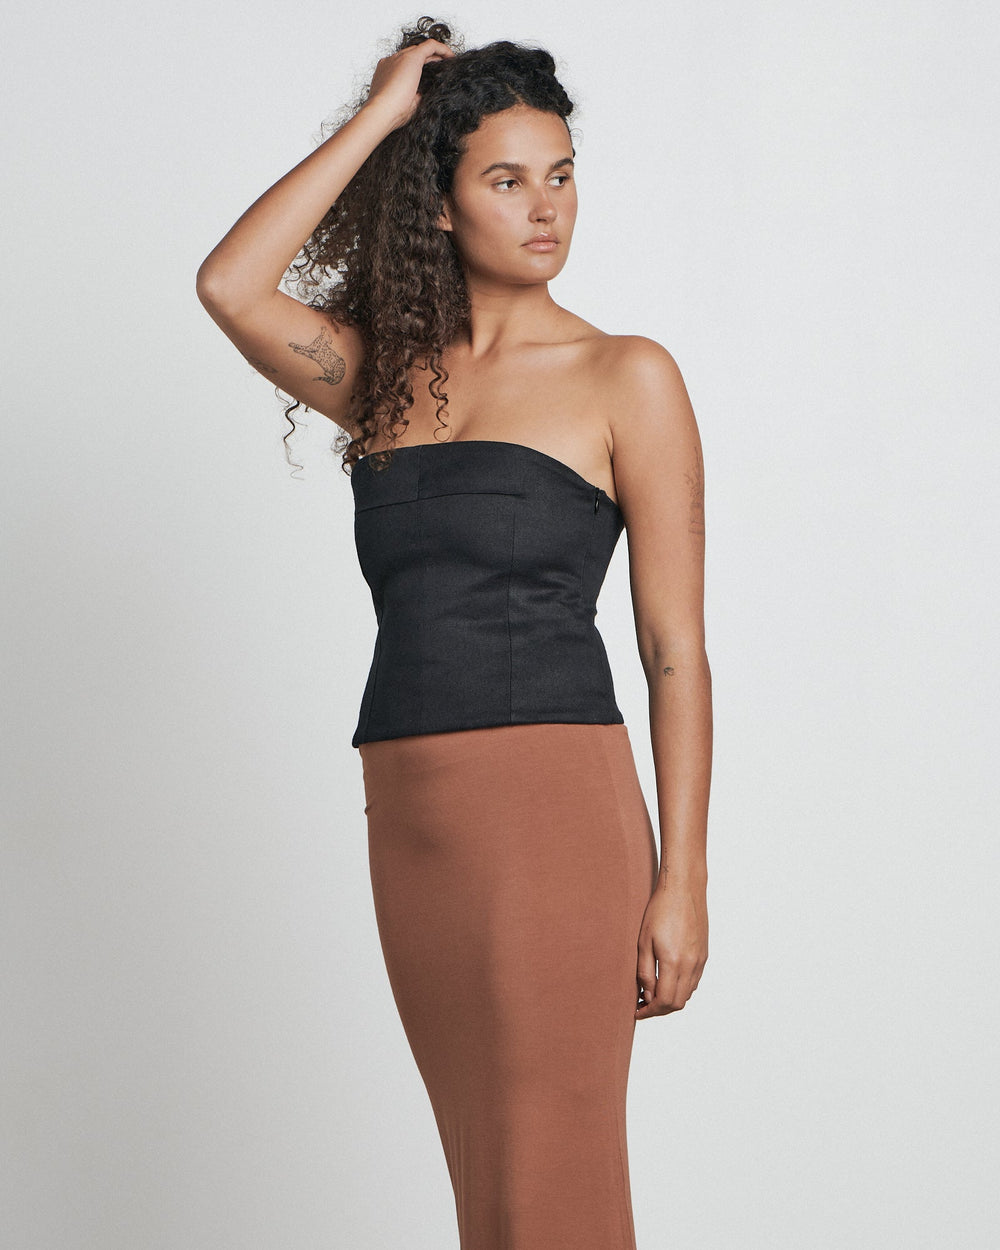 The Strapless Bustier Top